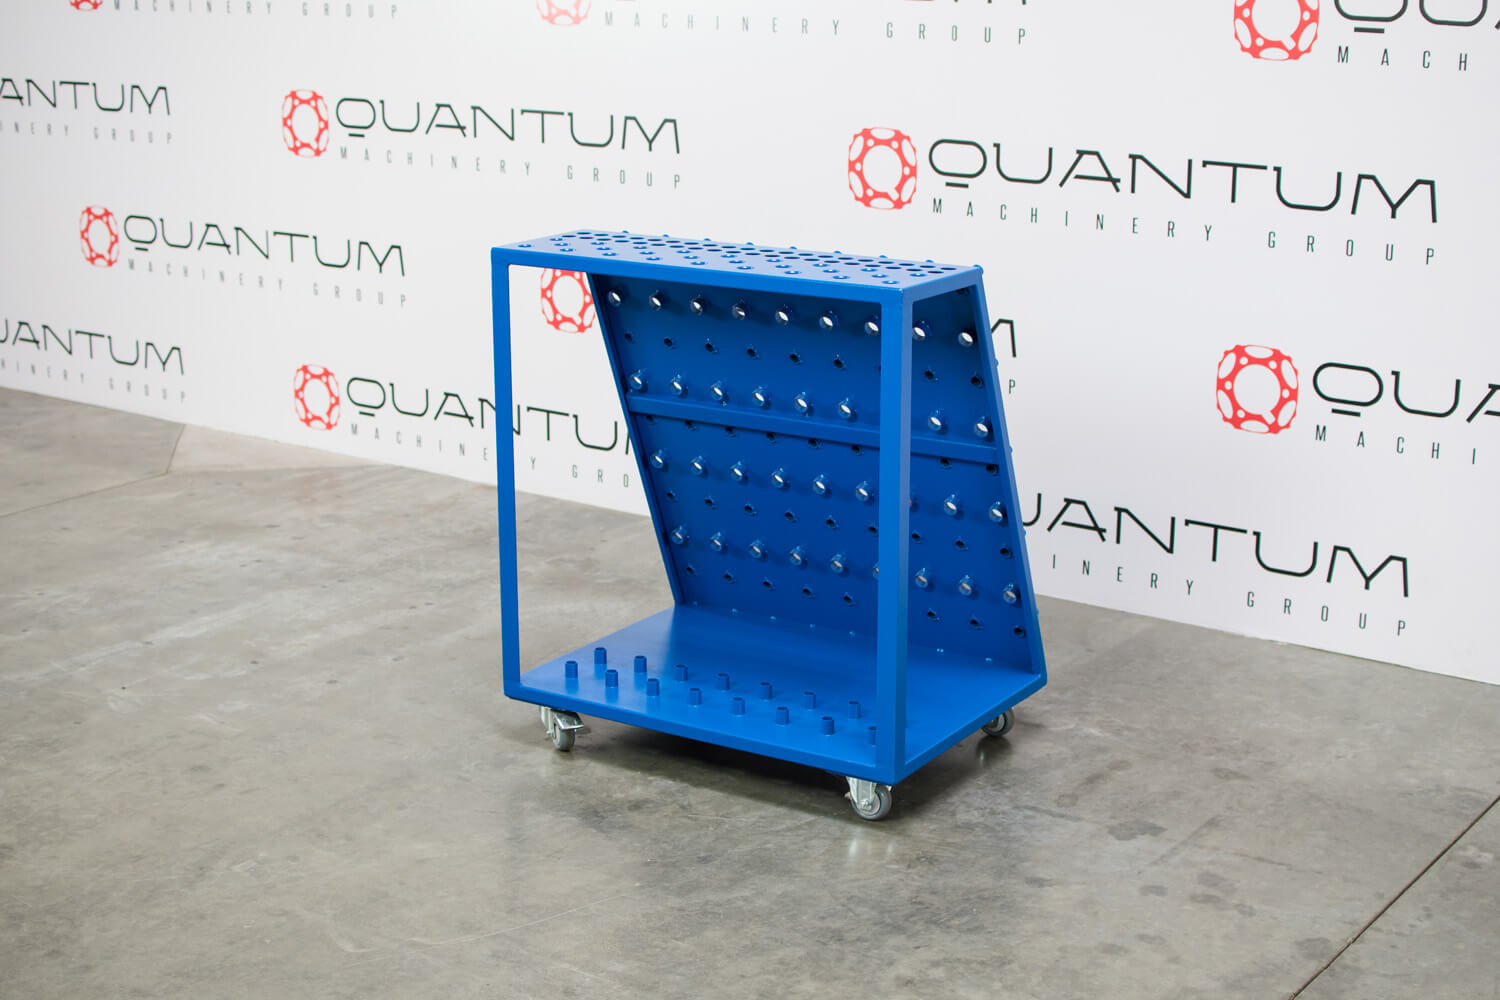 Tool Cart - Varnished (Item No. 2-280910) - Siegmund Welding Tables and Fixtures USA - A Division of Quantum Machinery Group